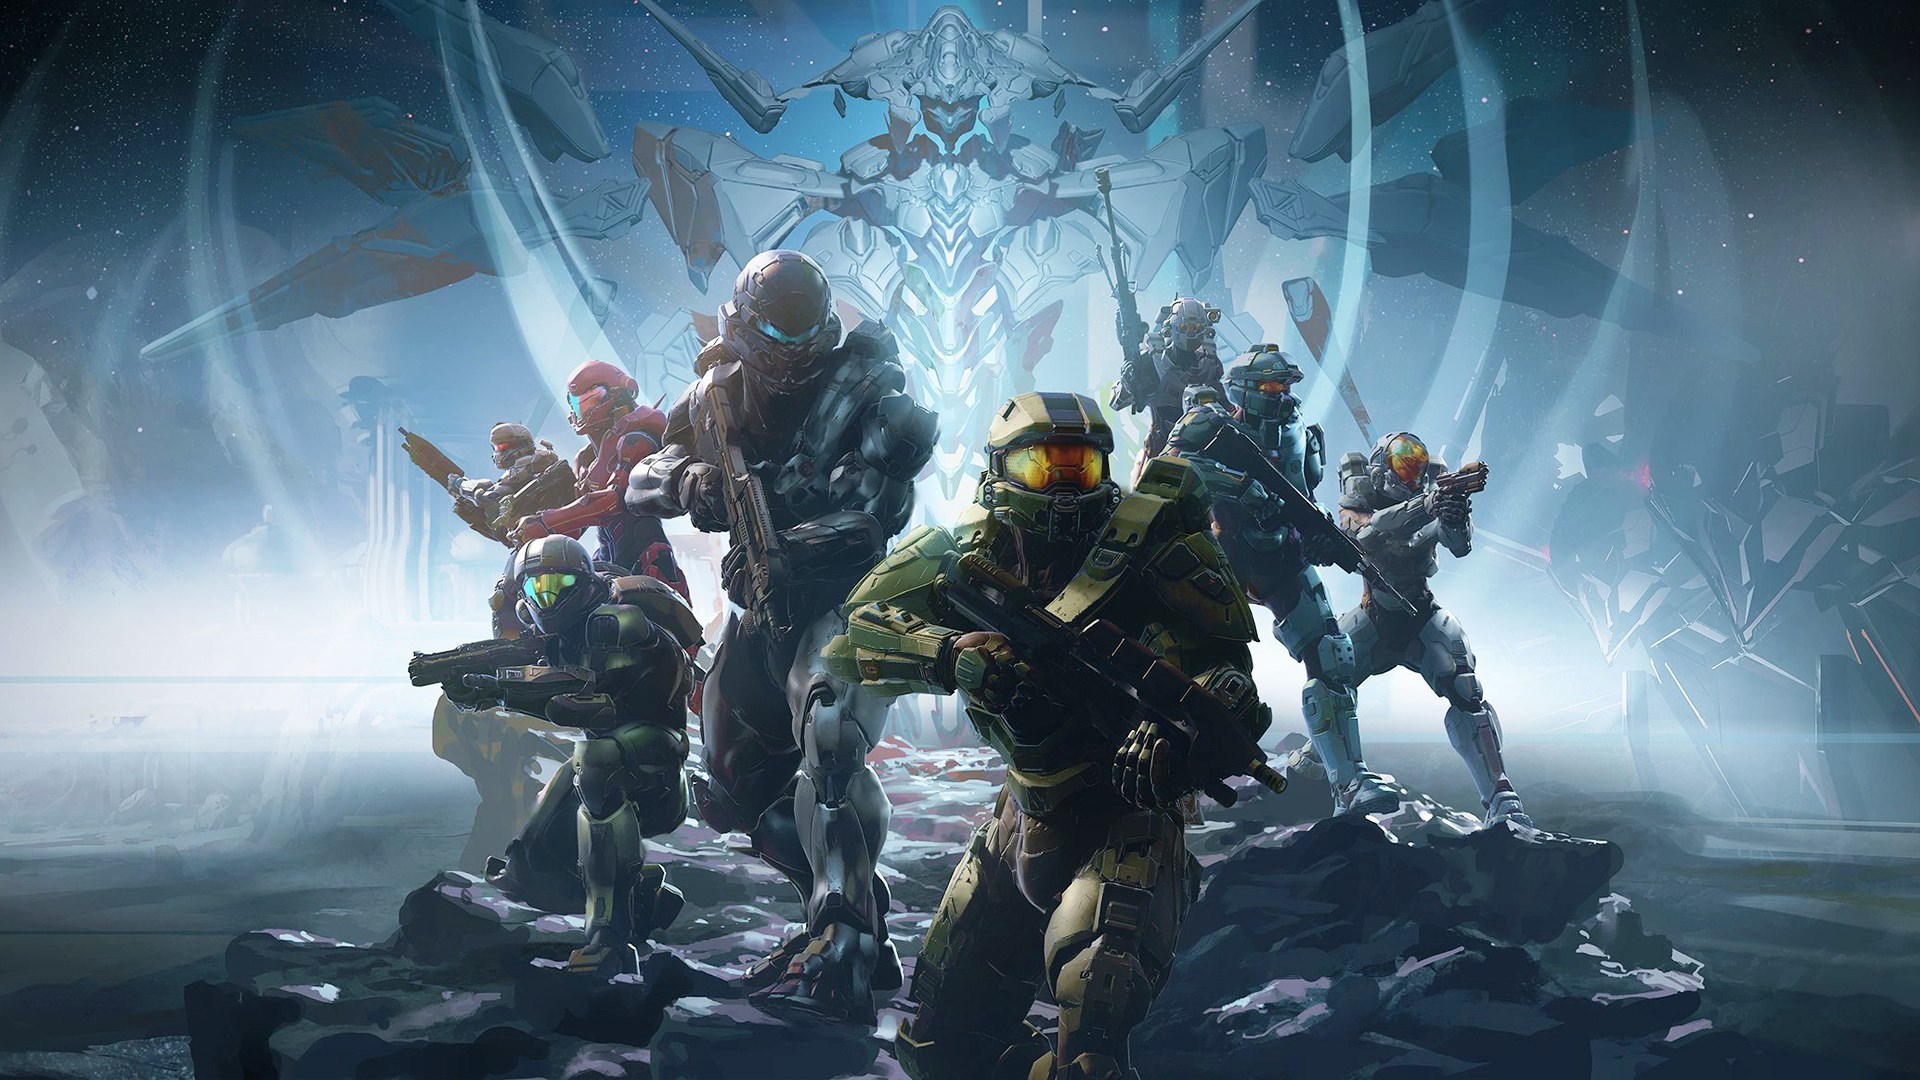 General 1920x1080 Halo 5: Guardians video games Blue Team Fred-104 Kelly-087 Linda-058 Spartan Locke Halo (game) cyan Spartans (Halo) Master Chief (Halo) video game art video game characters science fiction